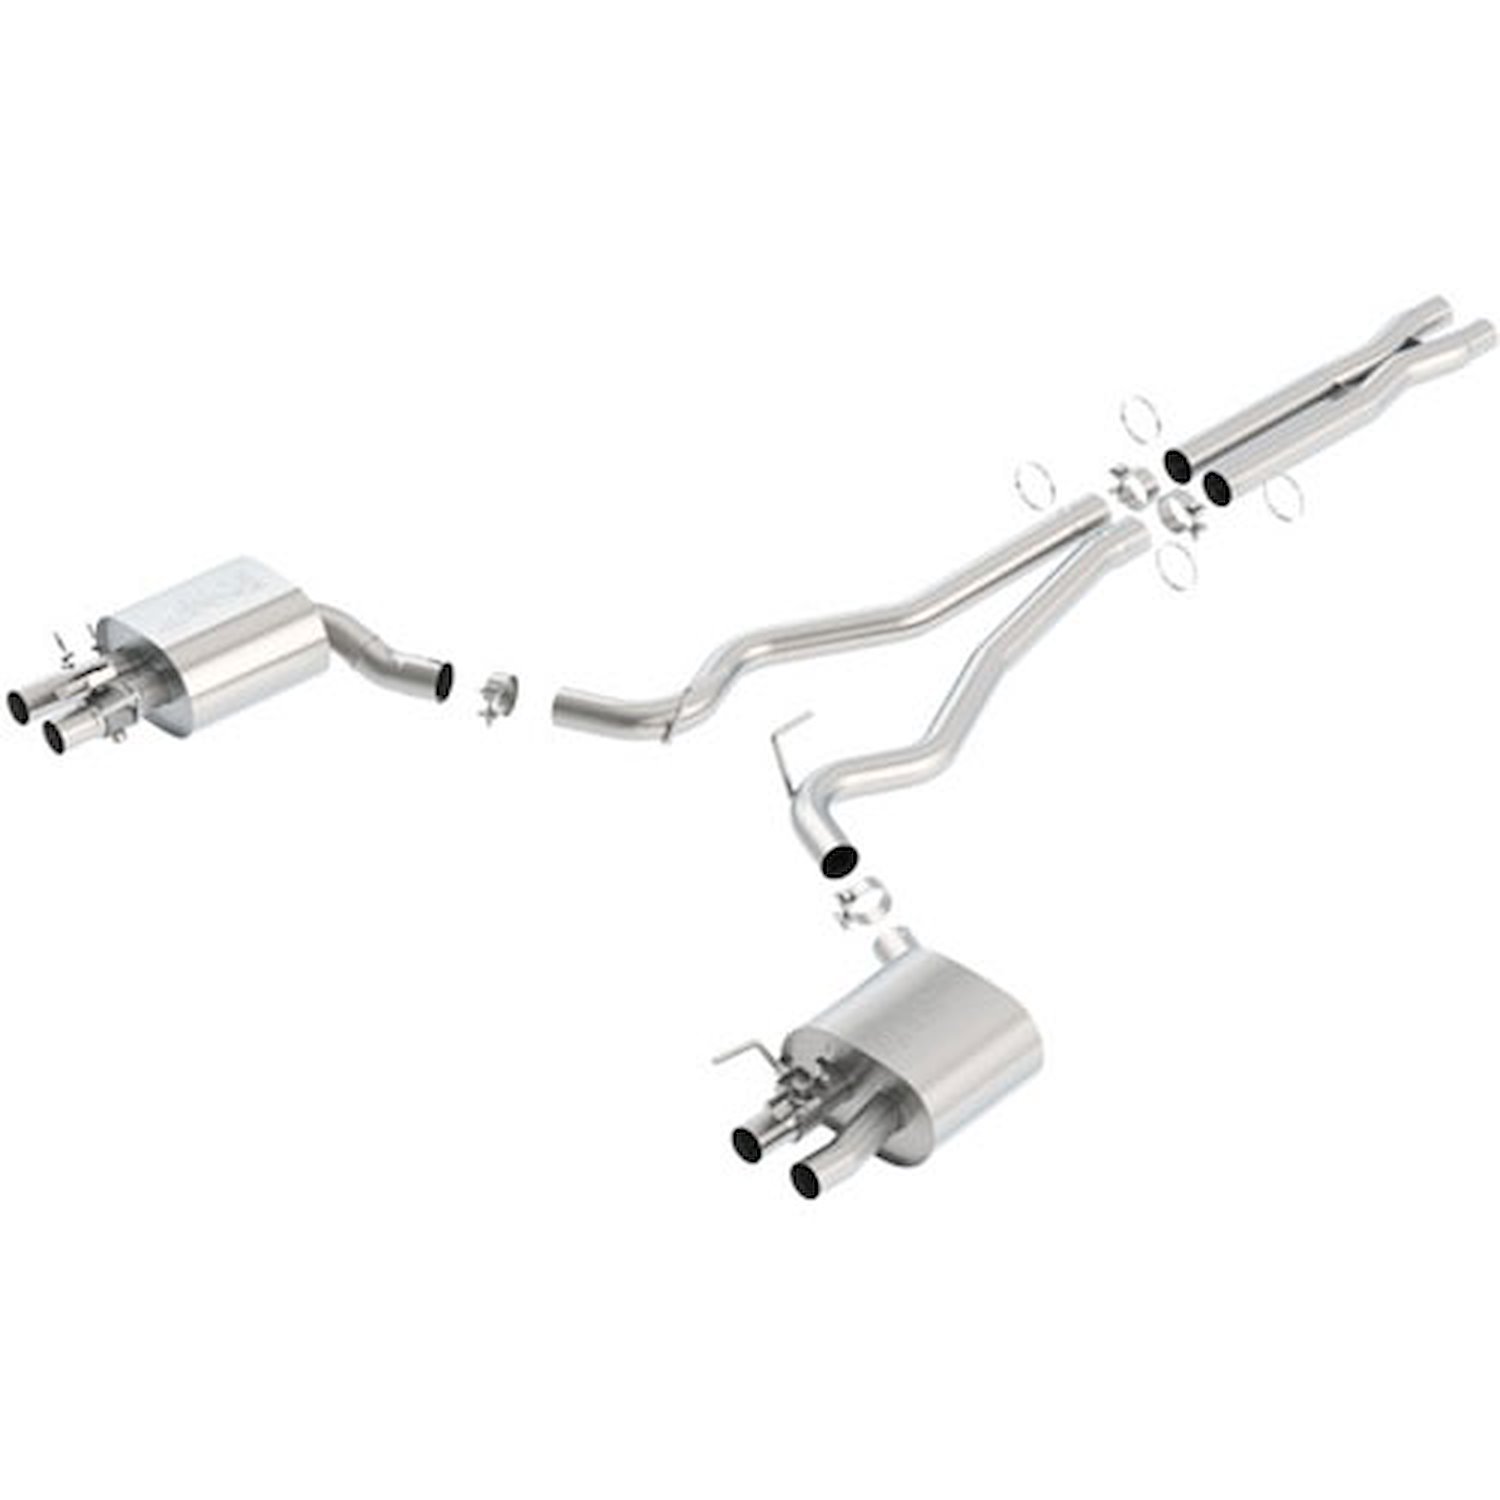 Cat-Back Exhaust System 2015-18 Mustang Shelby GT350 5.2L